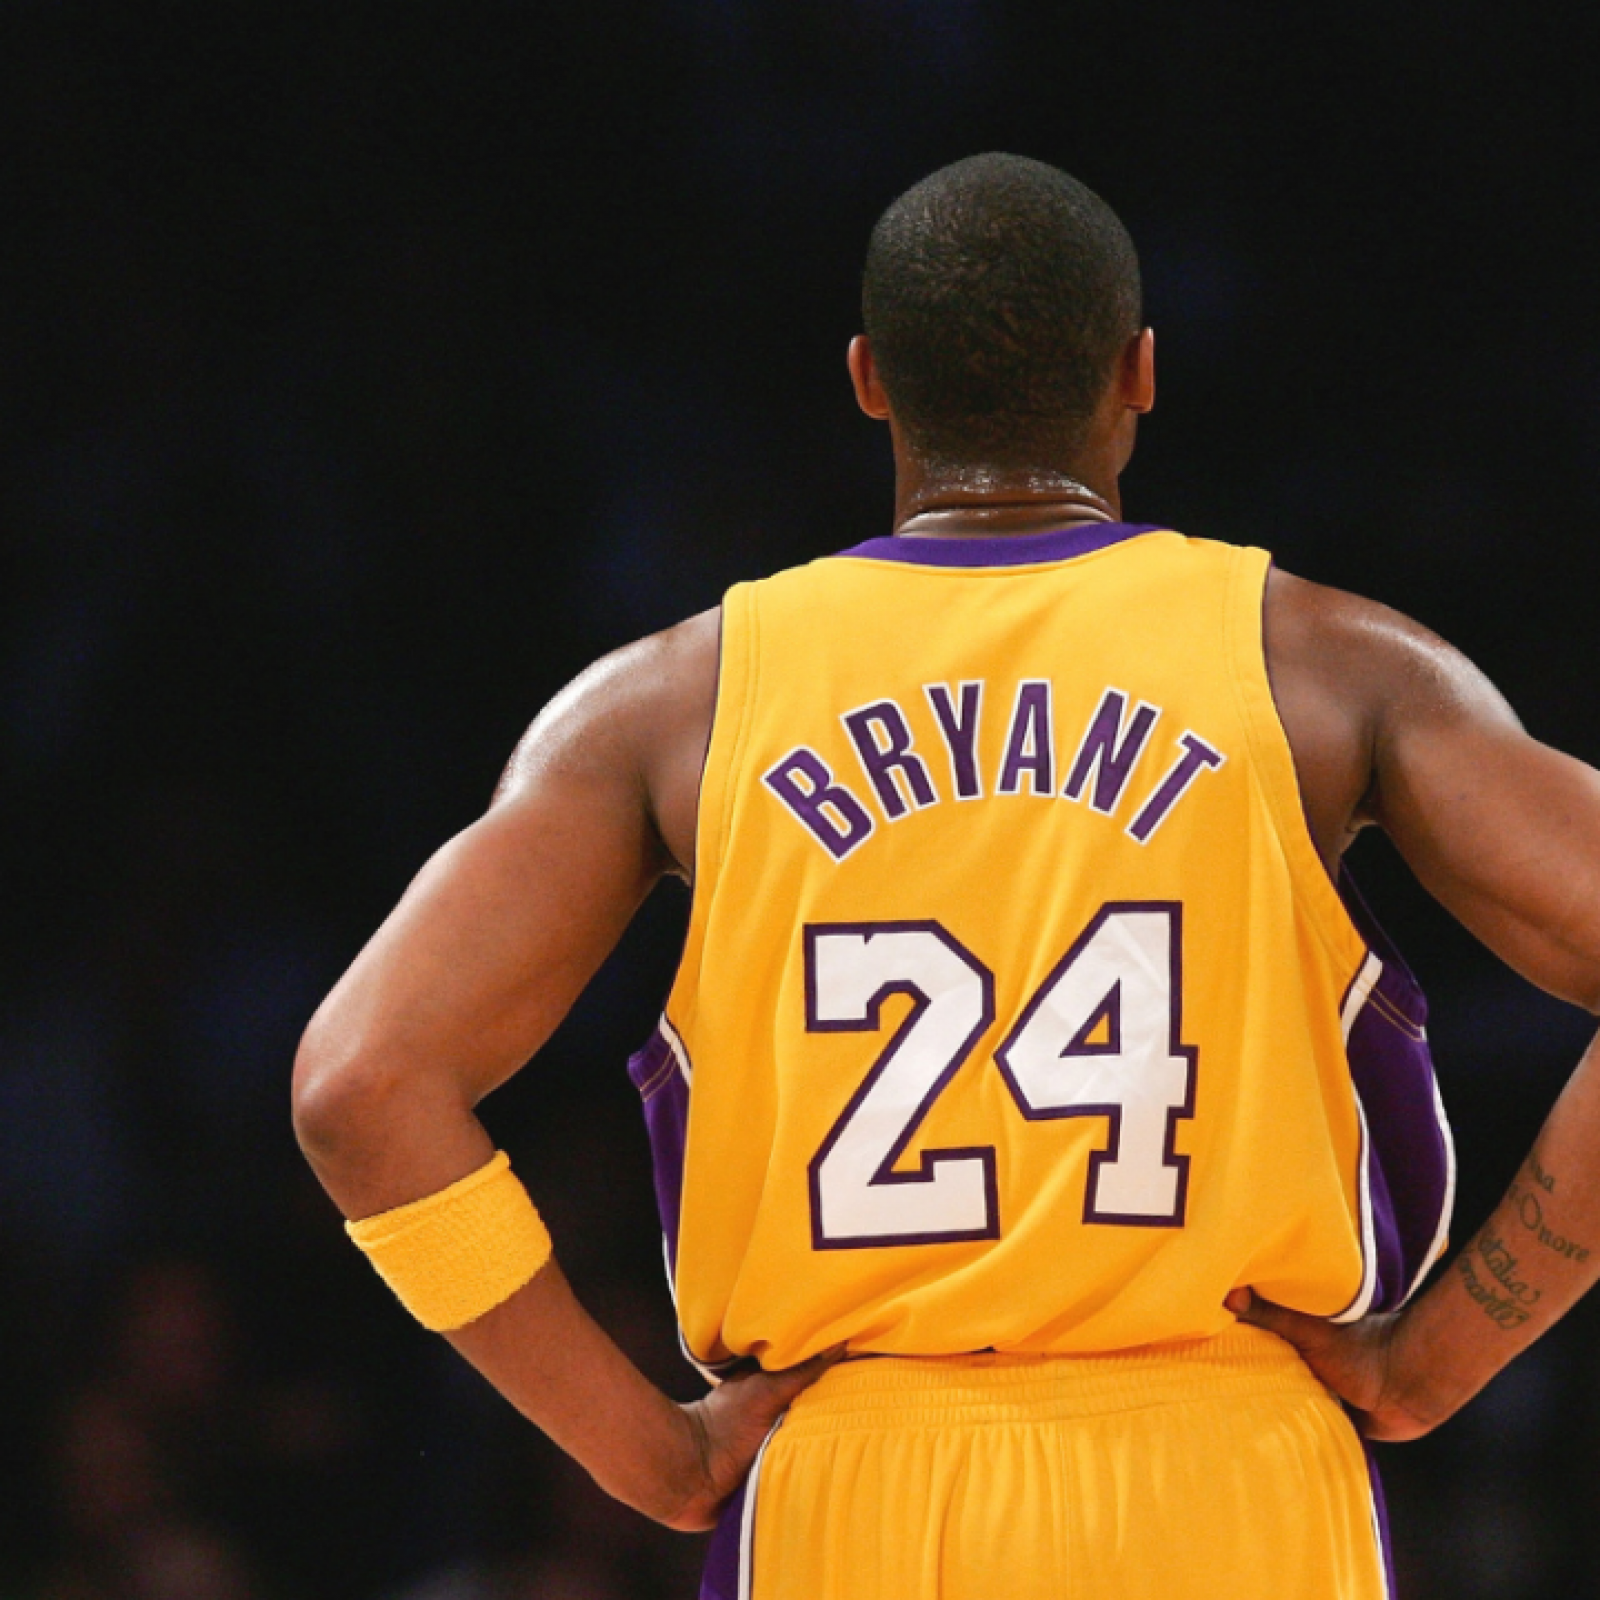 Los Angeles Lakers retire Kobe Bryant's No8 and No24 jerseys in NBA first, Kobe Bryant